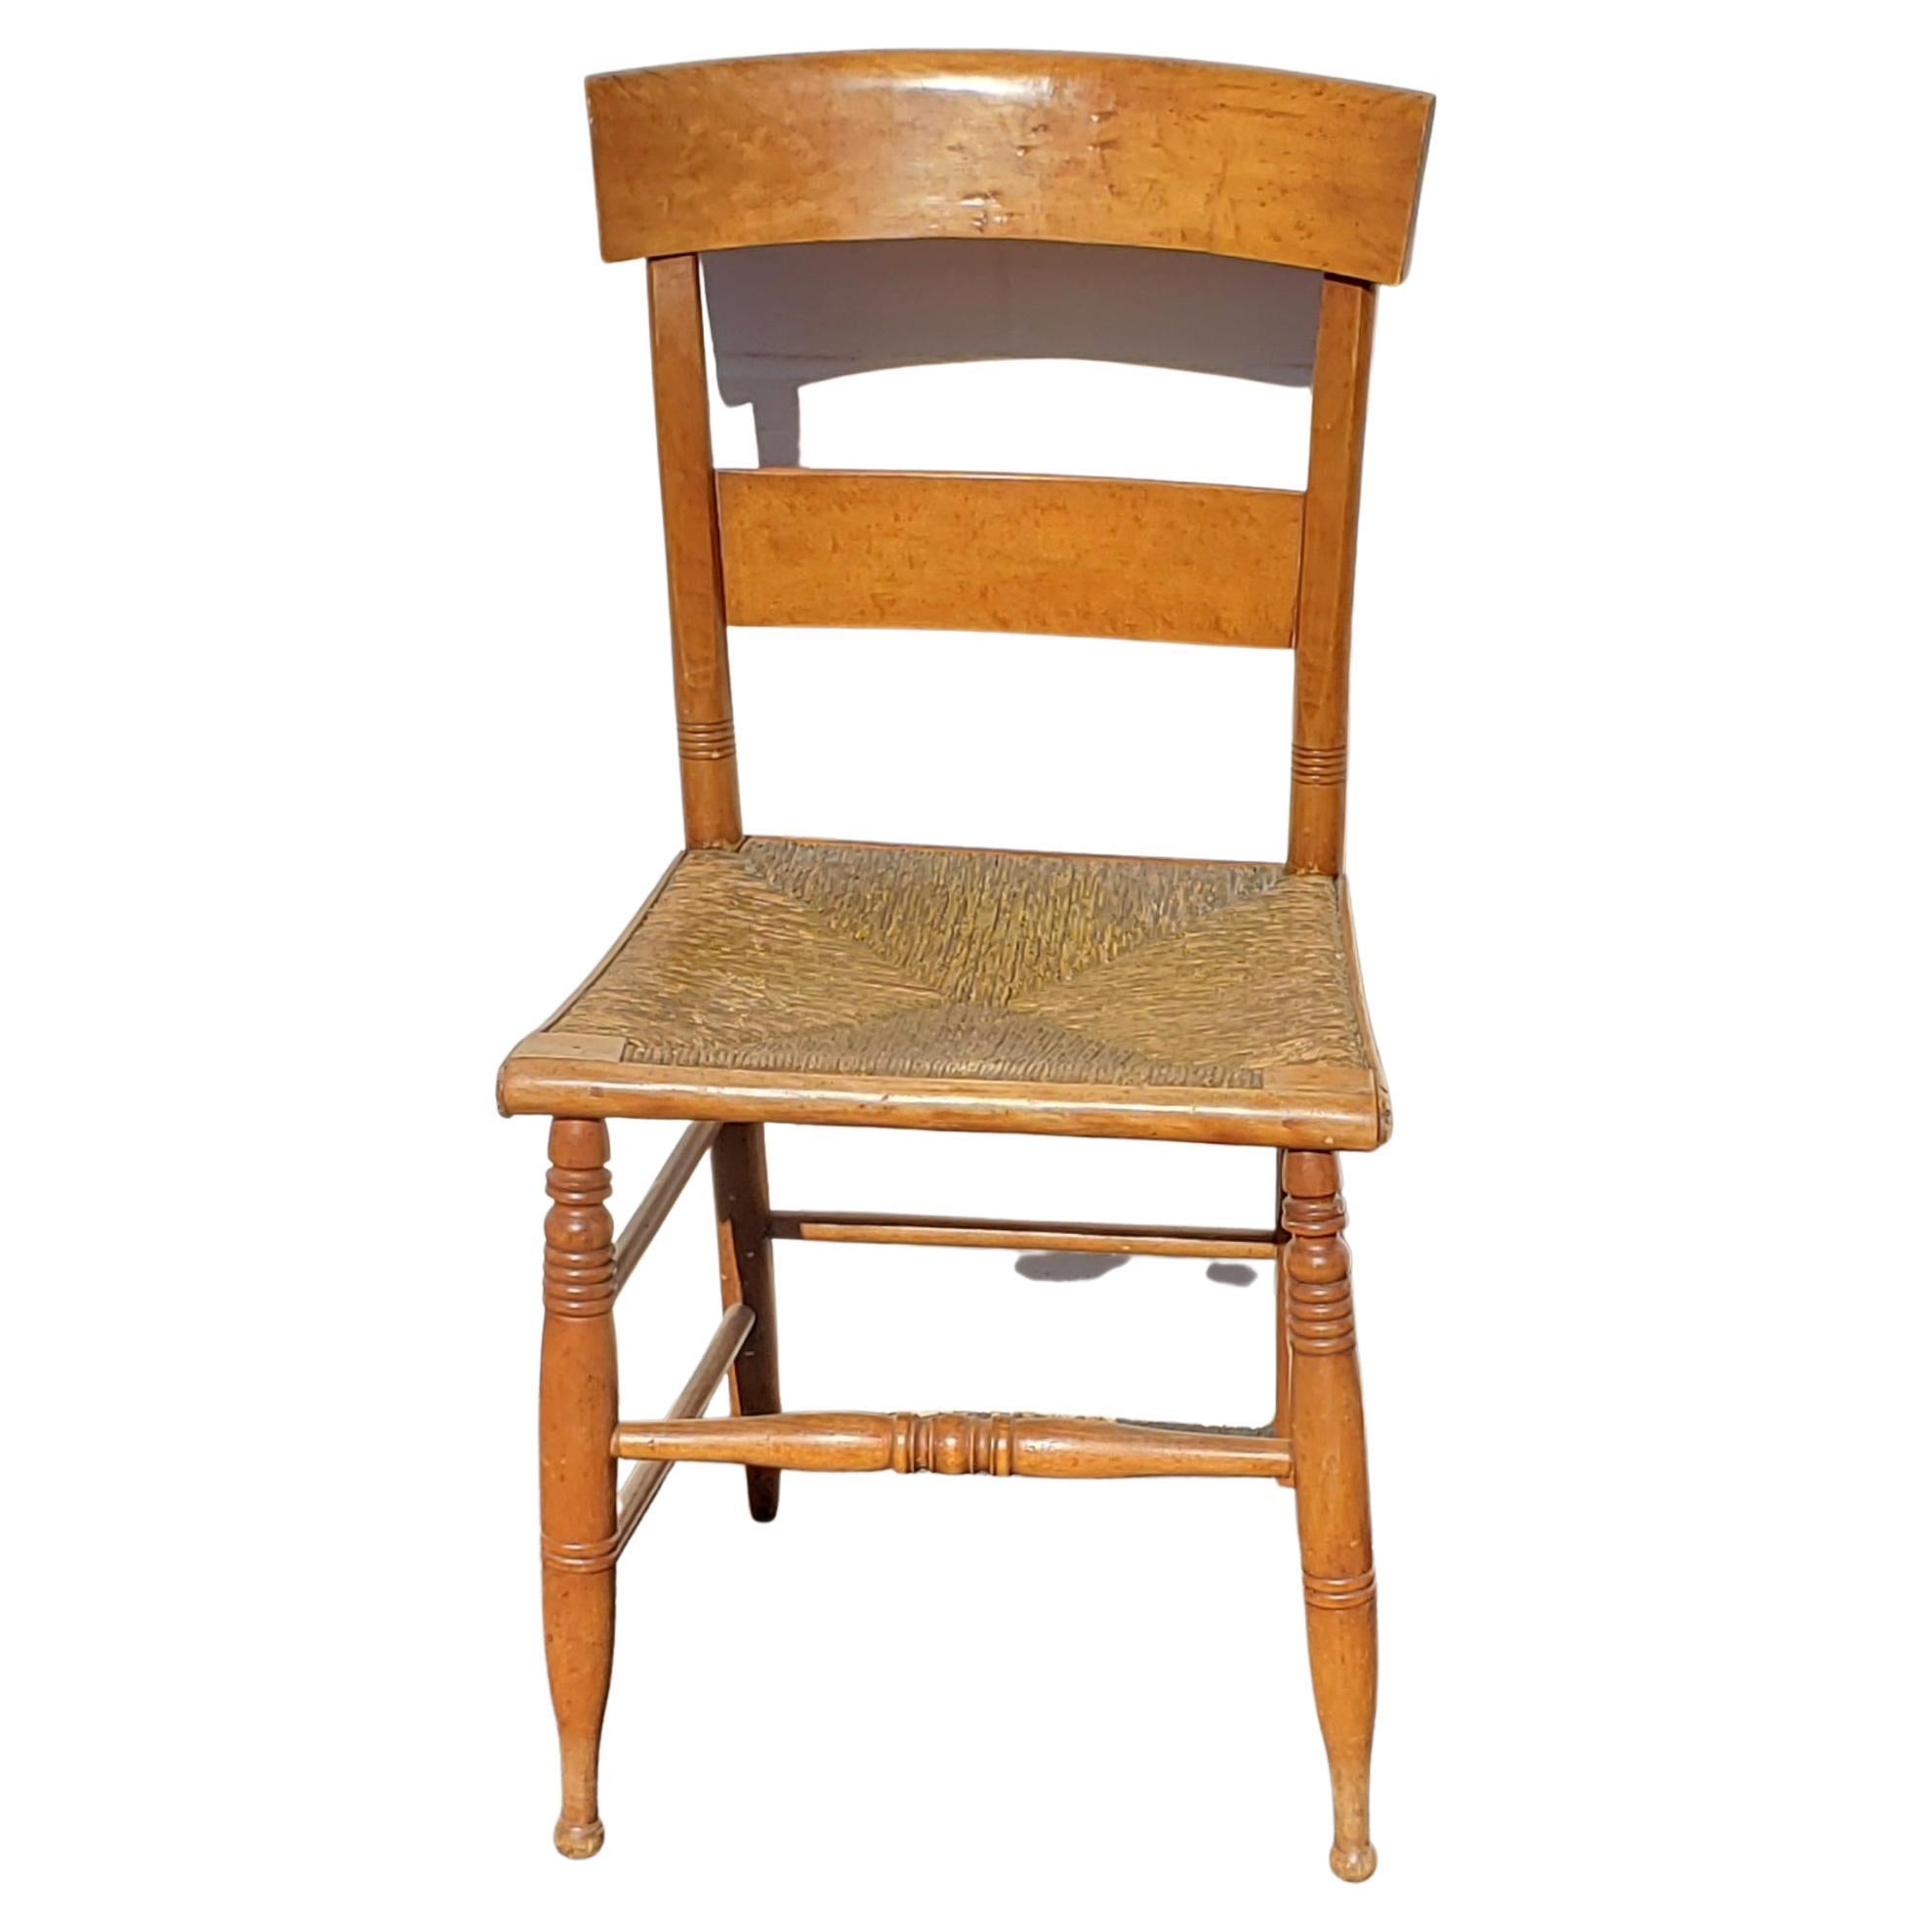 19th Century Antique Tiger Maple Bentwood Slat Back with Rush Seat Dining Chairs, circa 1860s